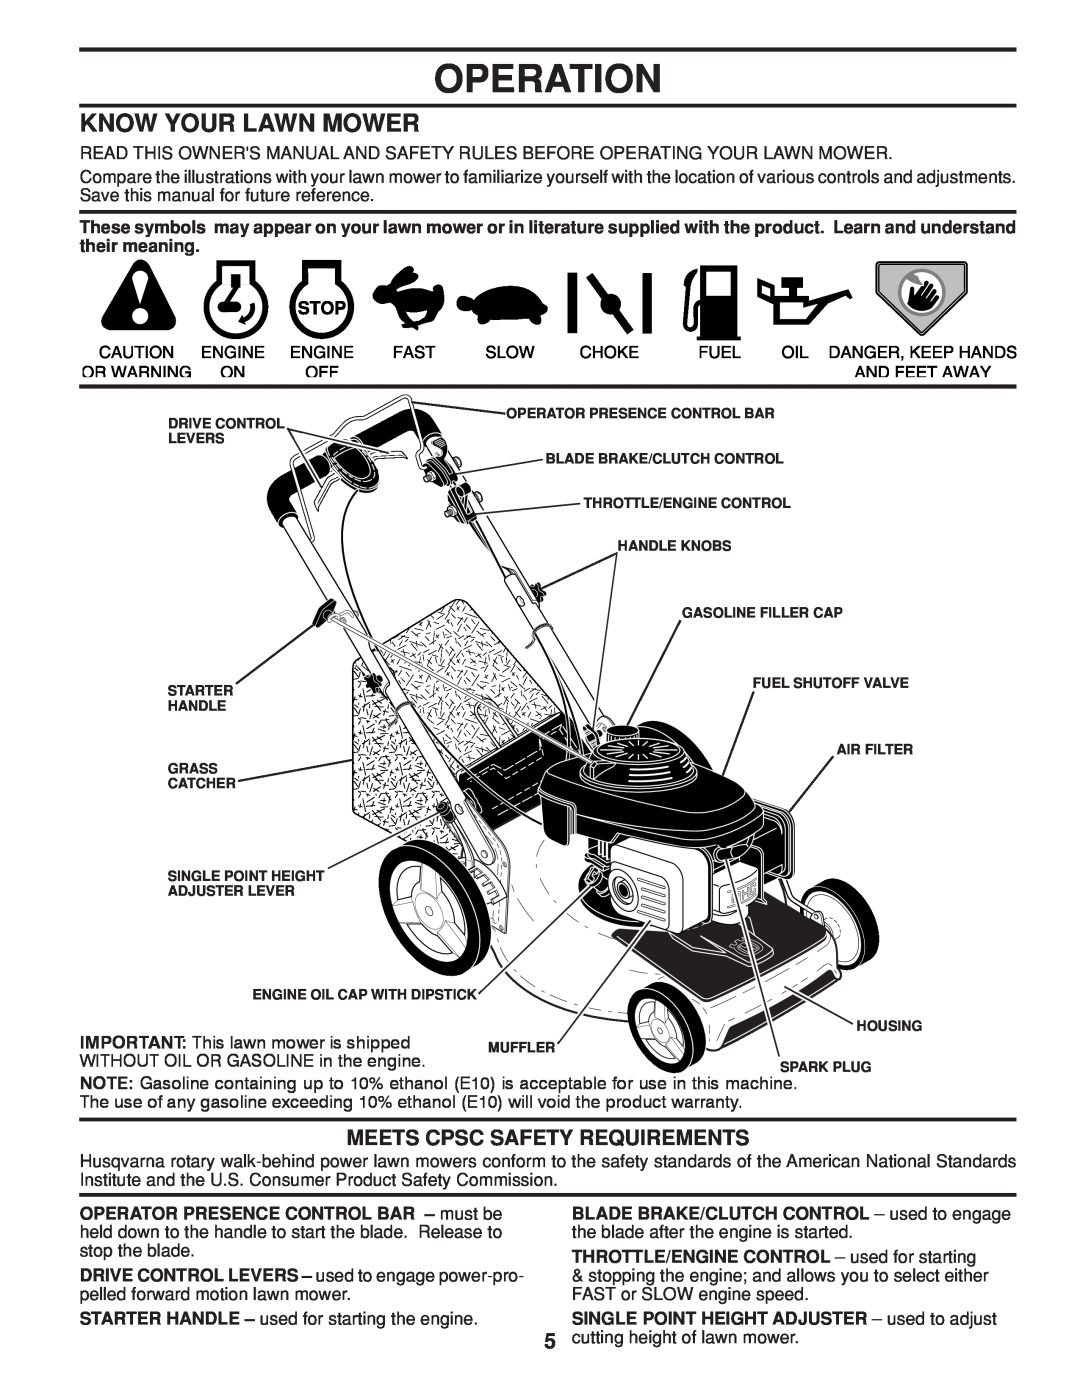 Husqvarna HU800BBC Operation, Know Your Lawn Mower, Meets Cpsc Safety Requirements, IMPORTANT This lawn mower is shipped 